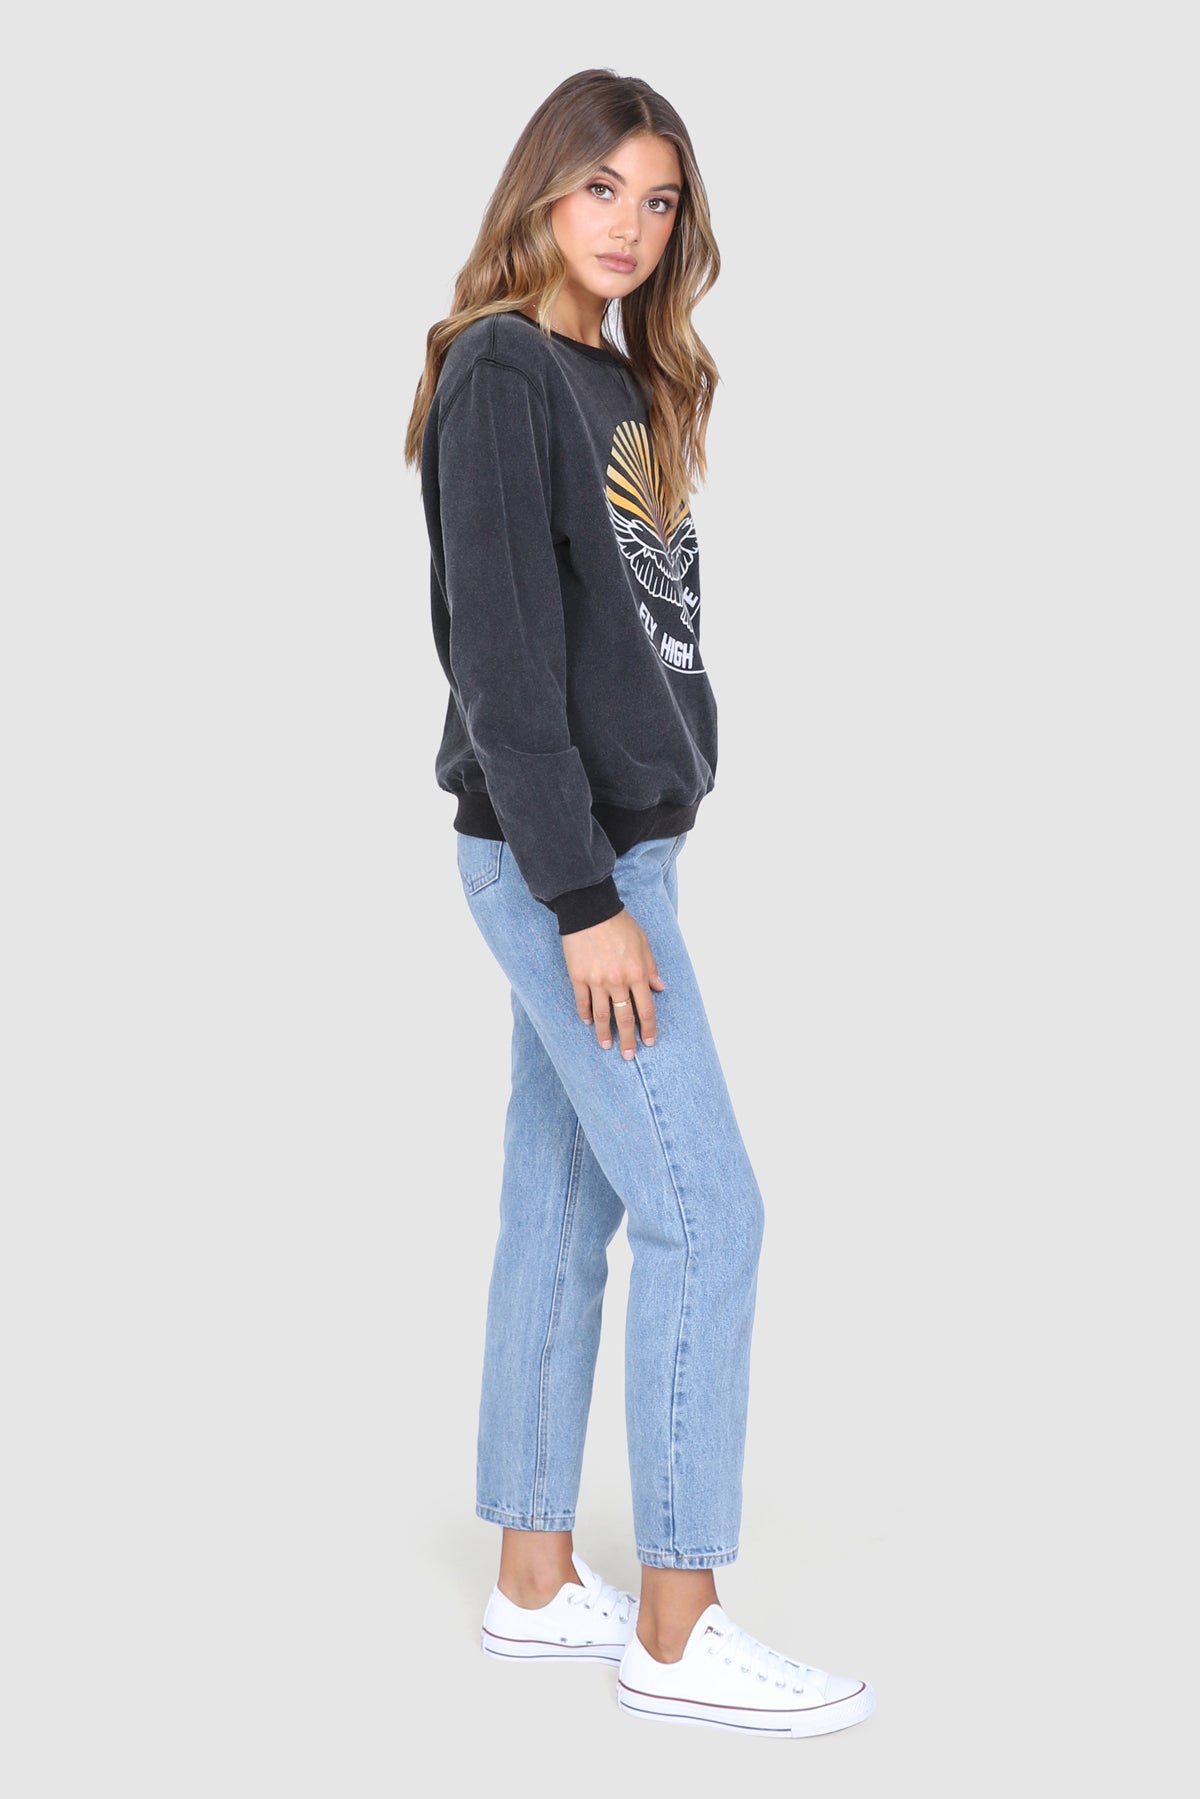 Bailage haired Caucasian Female wearing a  Vintage  Cotton Crew Neck  Round Neck  Eagle Graphic  Cuffed Long Sleeves  Relaxed Fit  Smoky Pullover paired with light washed mom jeans and white converse